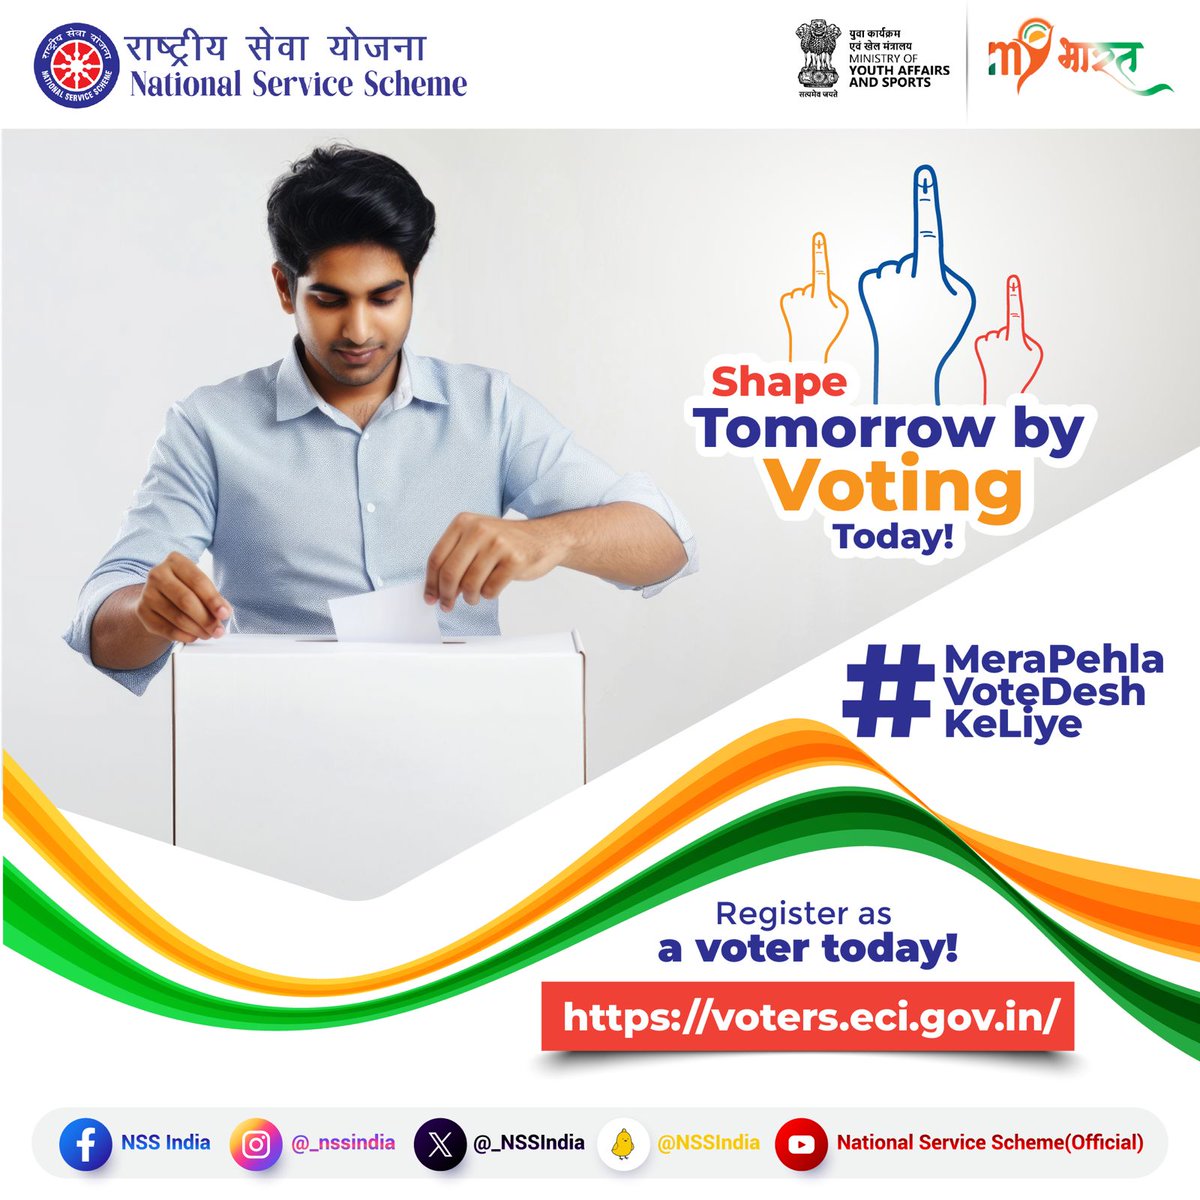 The power to shape our nation's future is in your hands! Cast your vote and make a difference. Your voice matters in building the community and the country you want to see. #voterawareness #MeraPehlaVoteDeshKeLiye #Vote4Sure